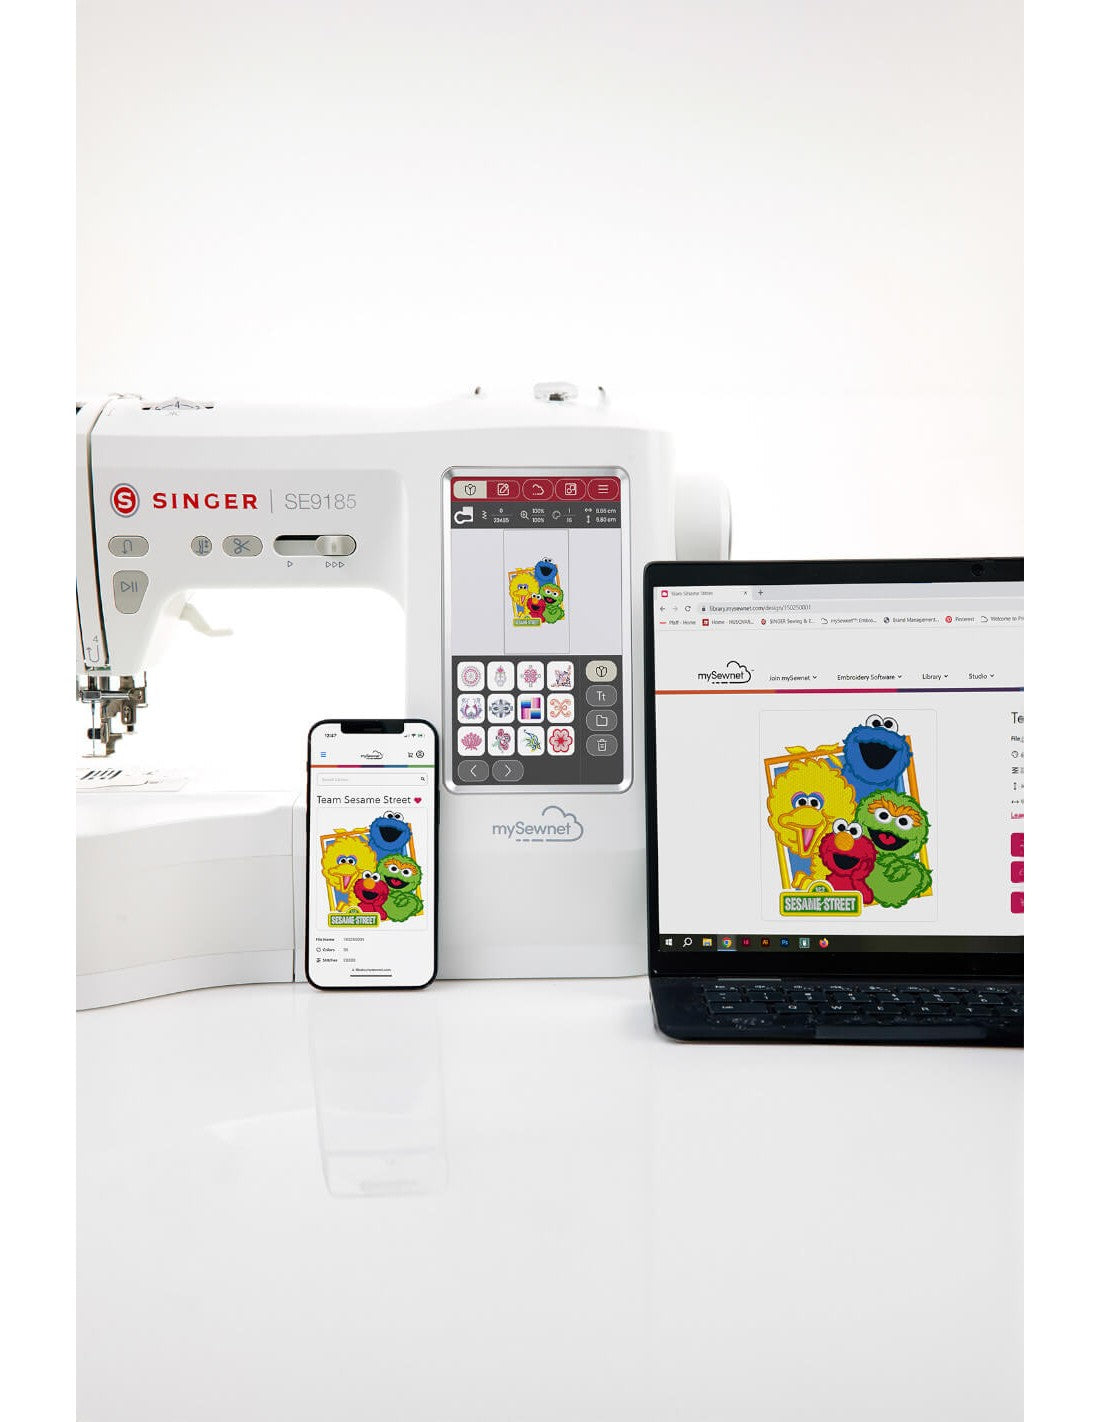 Singer SE9185 - Sewing, Quilting and Embroidery machine with WIFI, colour touchscreen. Includes a 90 day trial of MySewNet embroidery software * Save an Extra £100 - limited stock on this offer remaining *